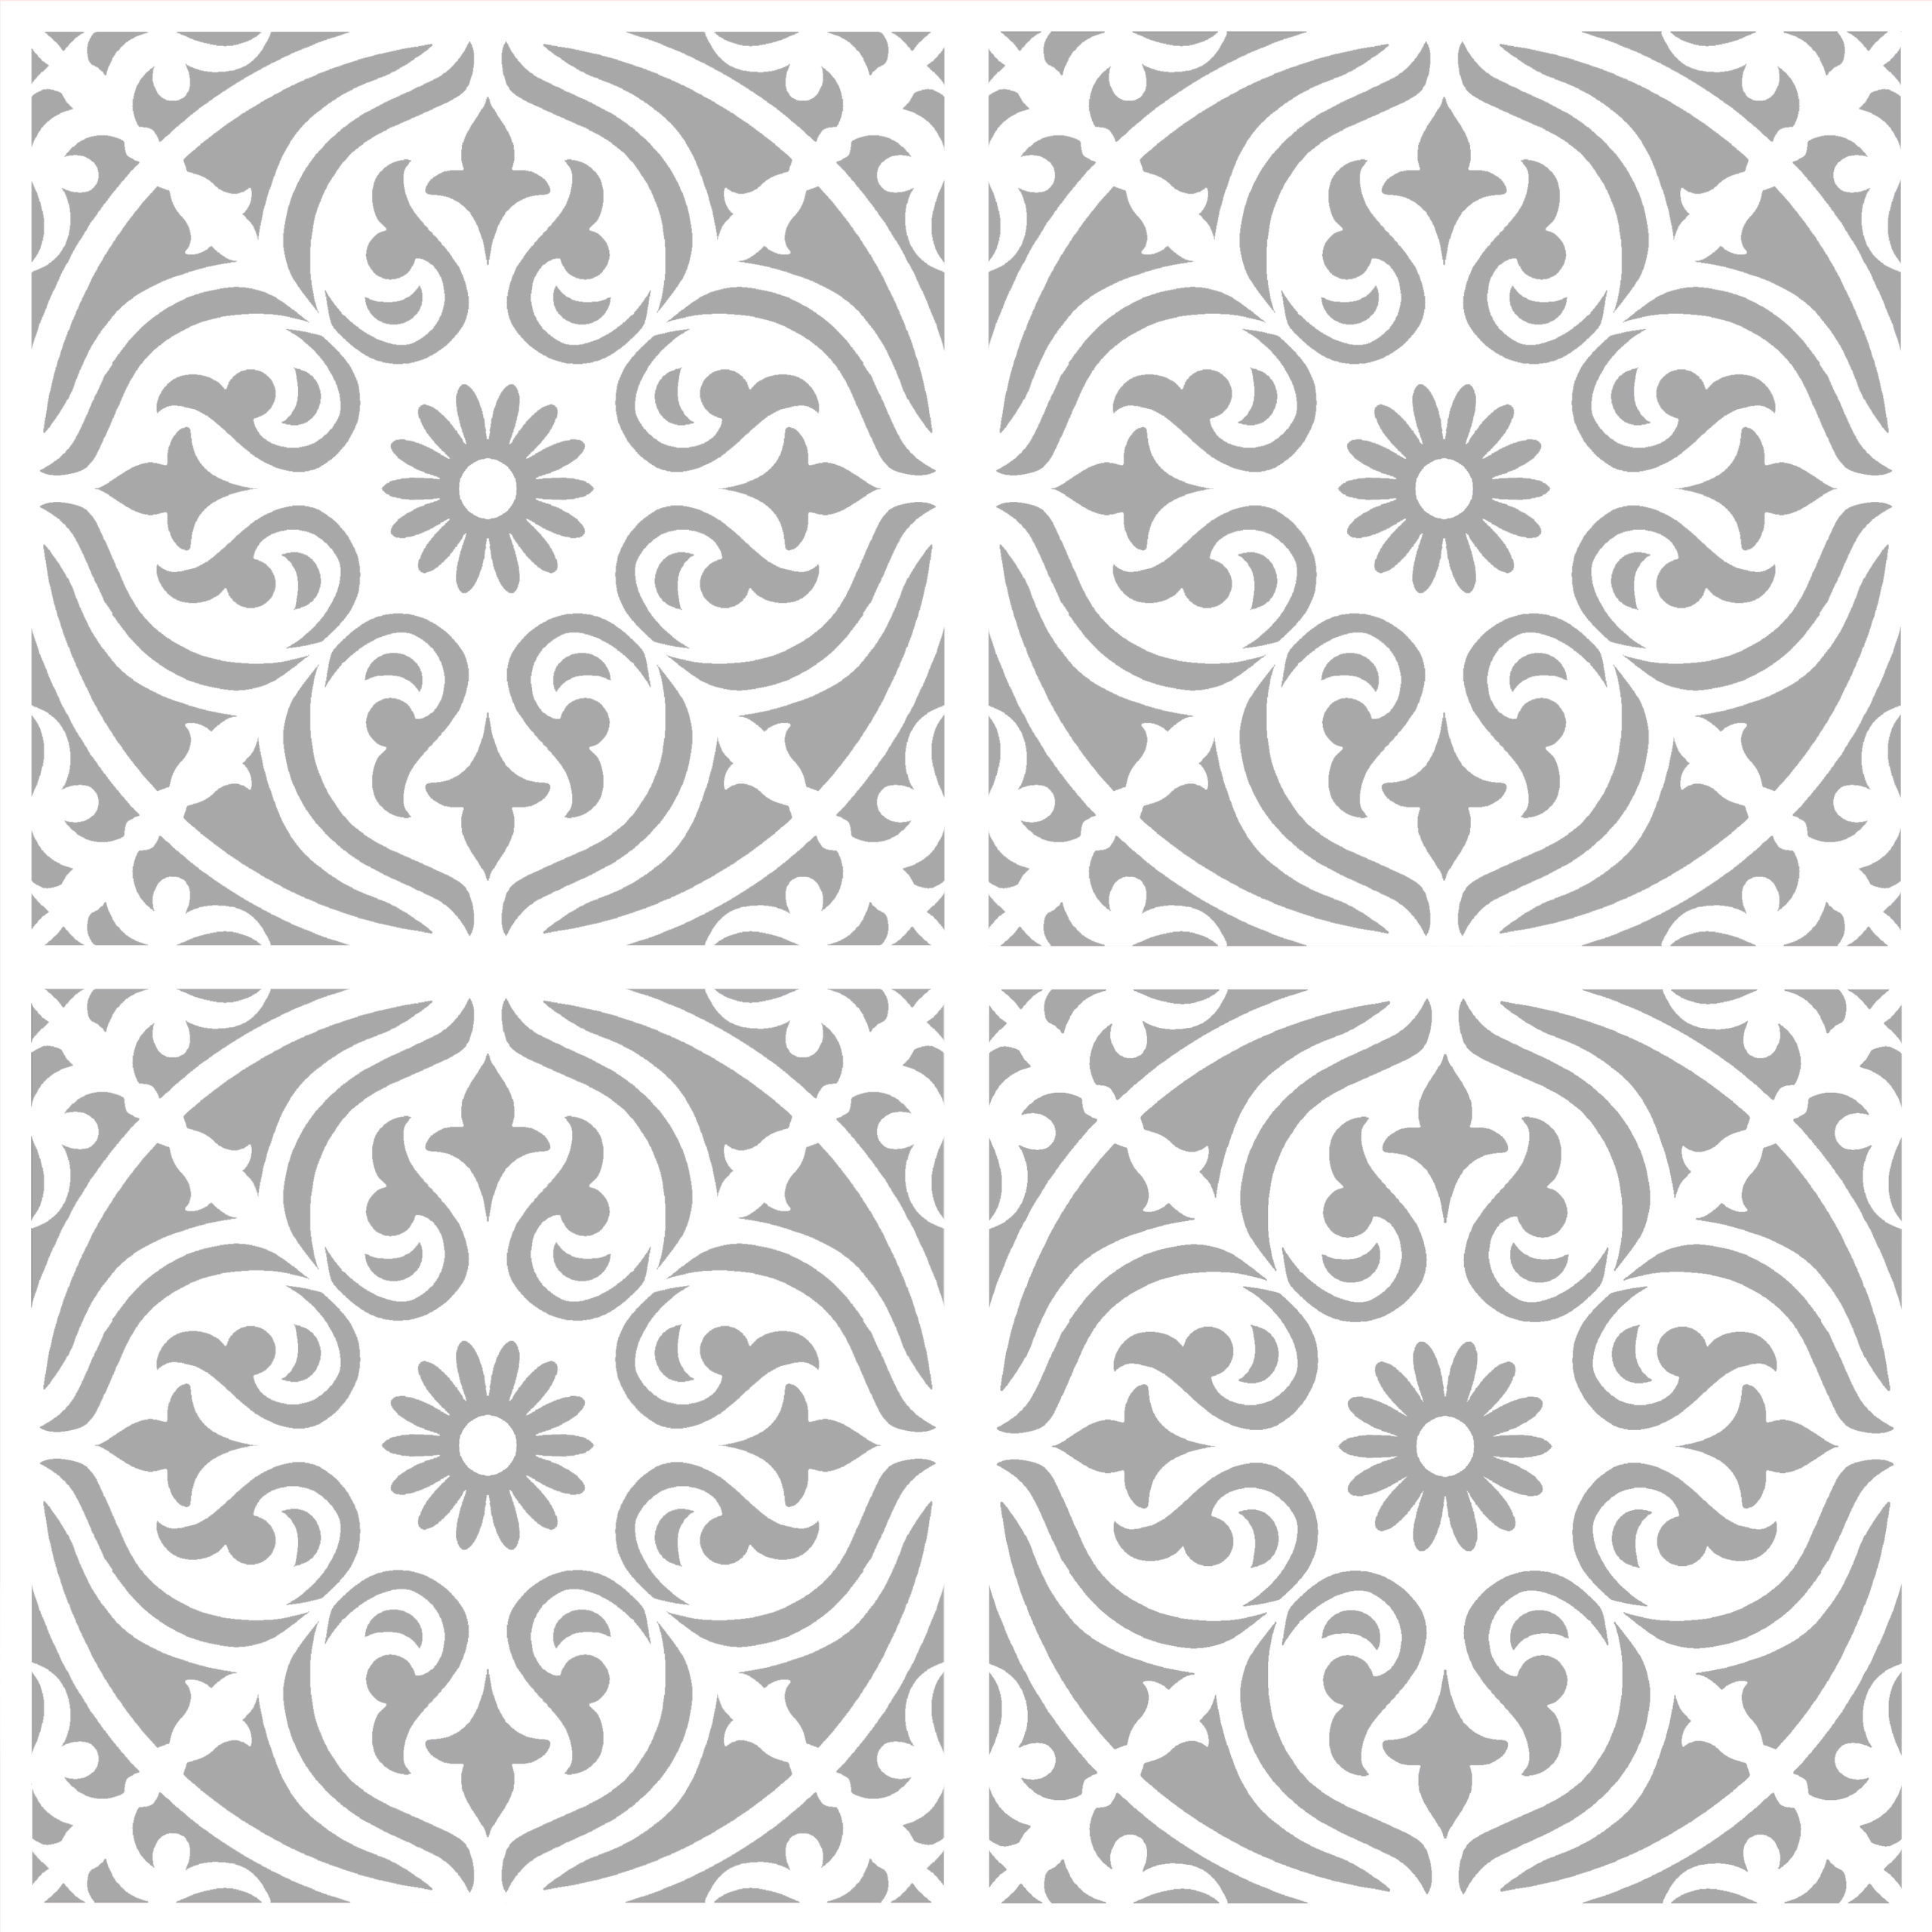 HENLEY Tile Stencil for Walls, Floors, Patios and Furniture